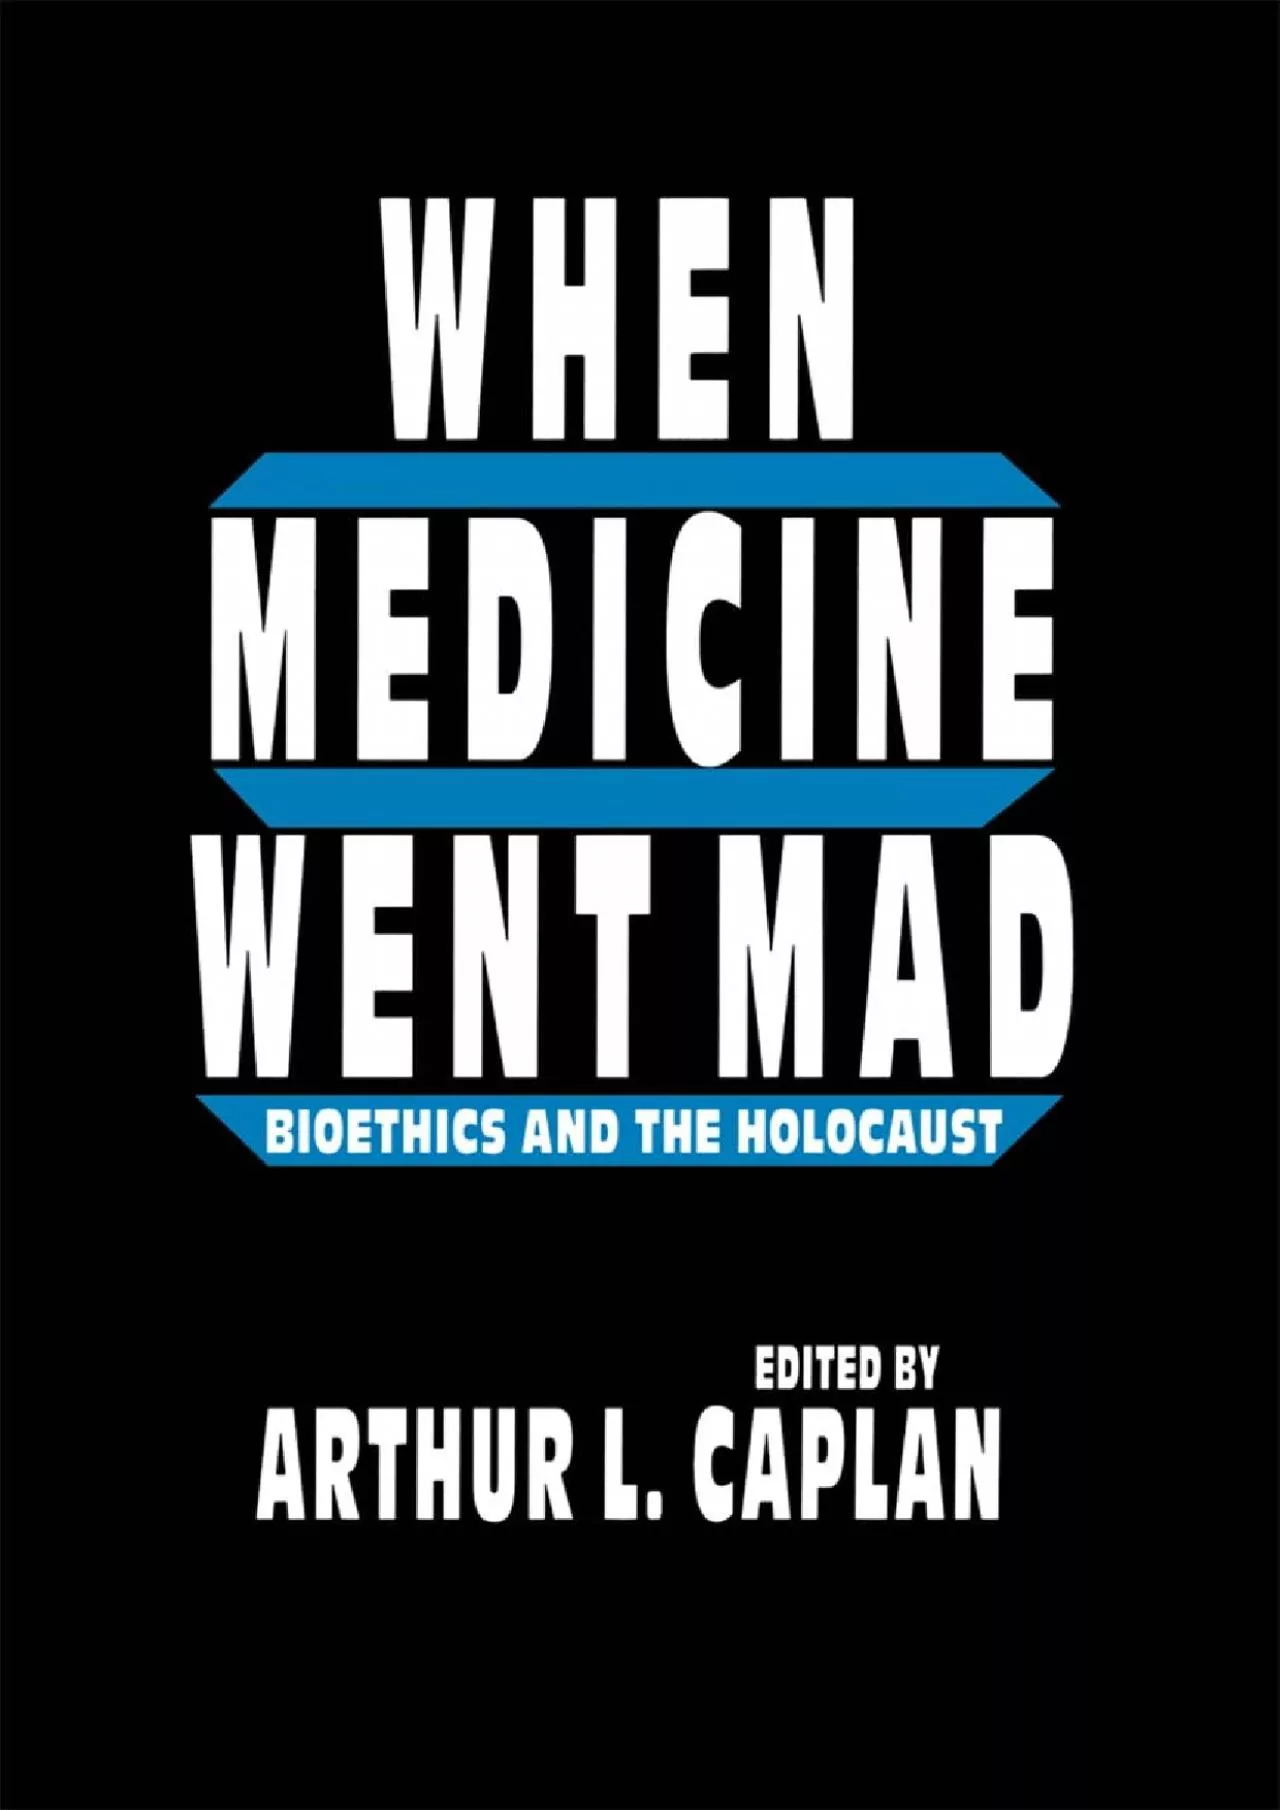 (DOWNLOAD)-When Medicine Went Mad: Bioethics and the Holocaust (Contemporary Issues in